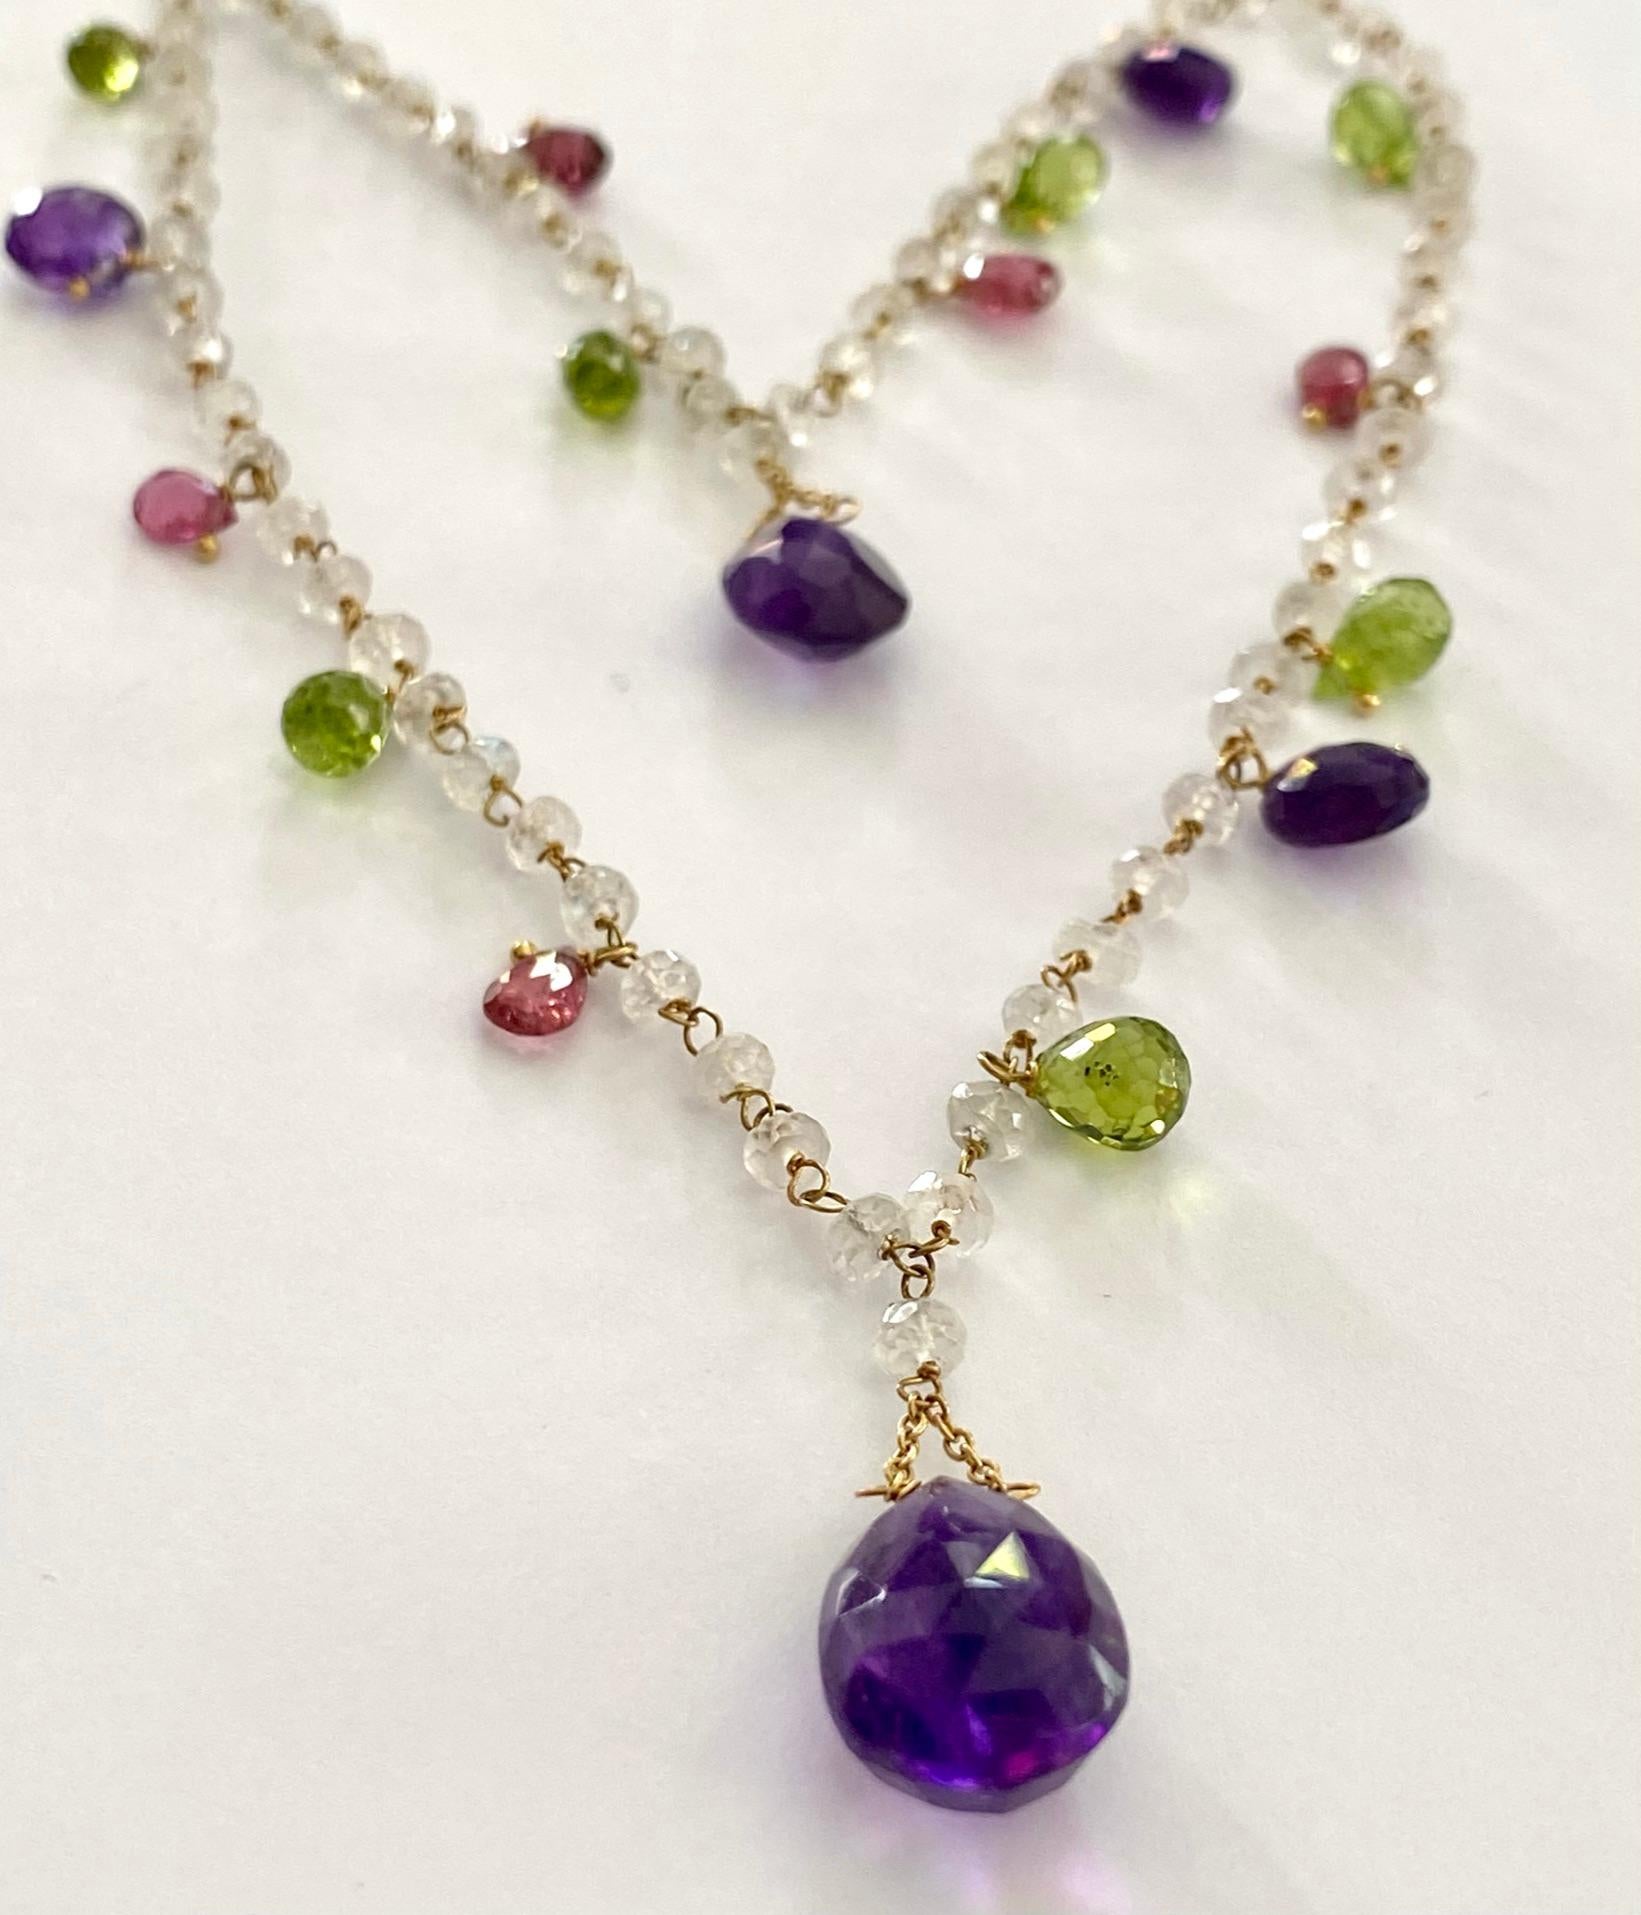 One (1) 18 Karat Yellow Gold Neclace, stamped: 750 
Set with:
5 pieces of natural Amethyst: Purple, Briolette.
7 pieces of Natural Peridot, Yellowich green, Briolette.
5 pieces of natural Rubellite, Pink, Briolette.
110 Pieces of Natural Moonstone,